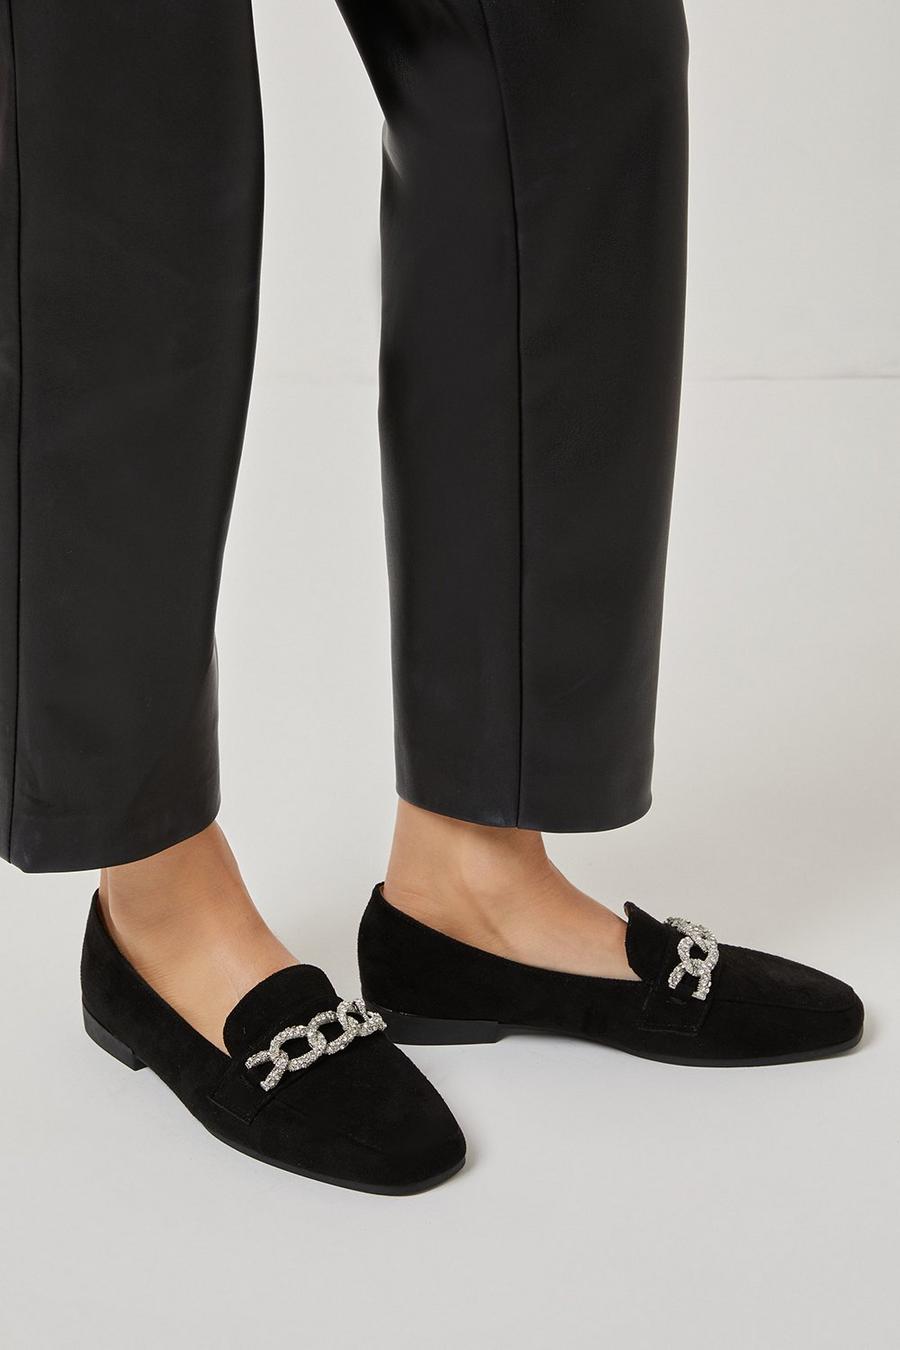 Lina Diamante Chain Detail Square Toe Soft Loafers